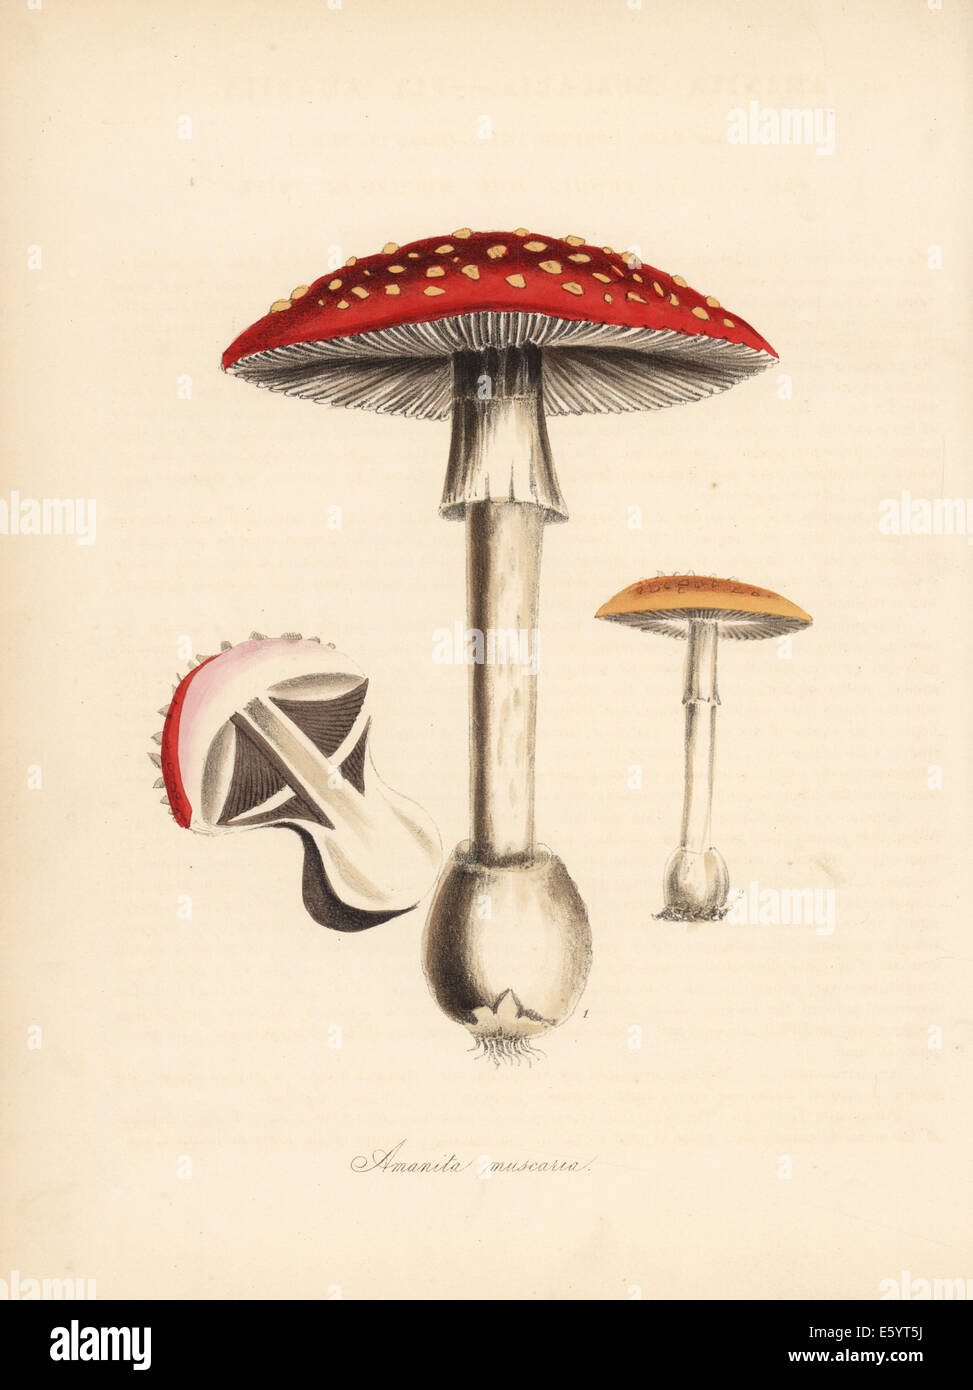 Champignons agaric Fly, Amanita muscaria. Banque D'Images